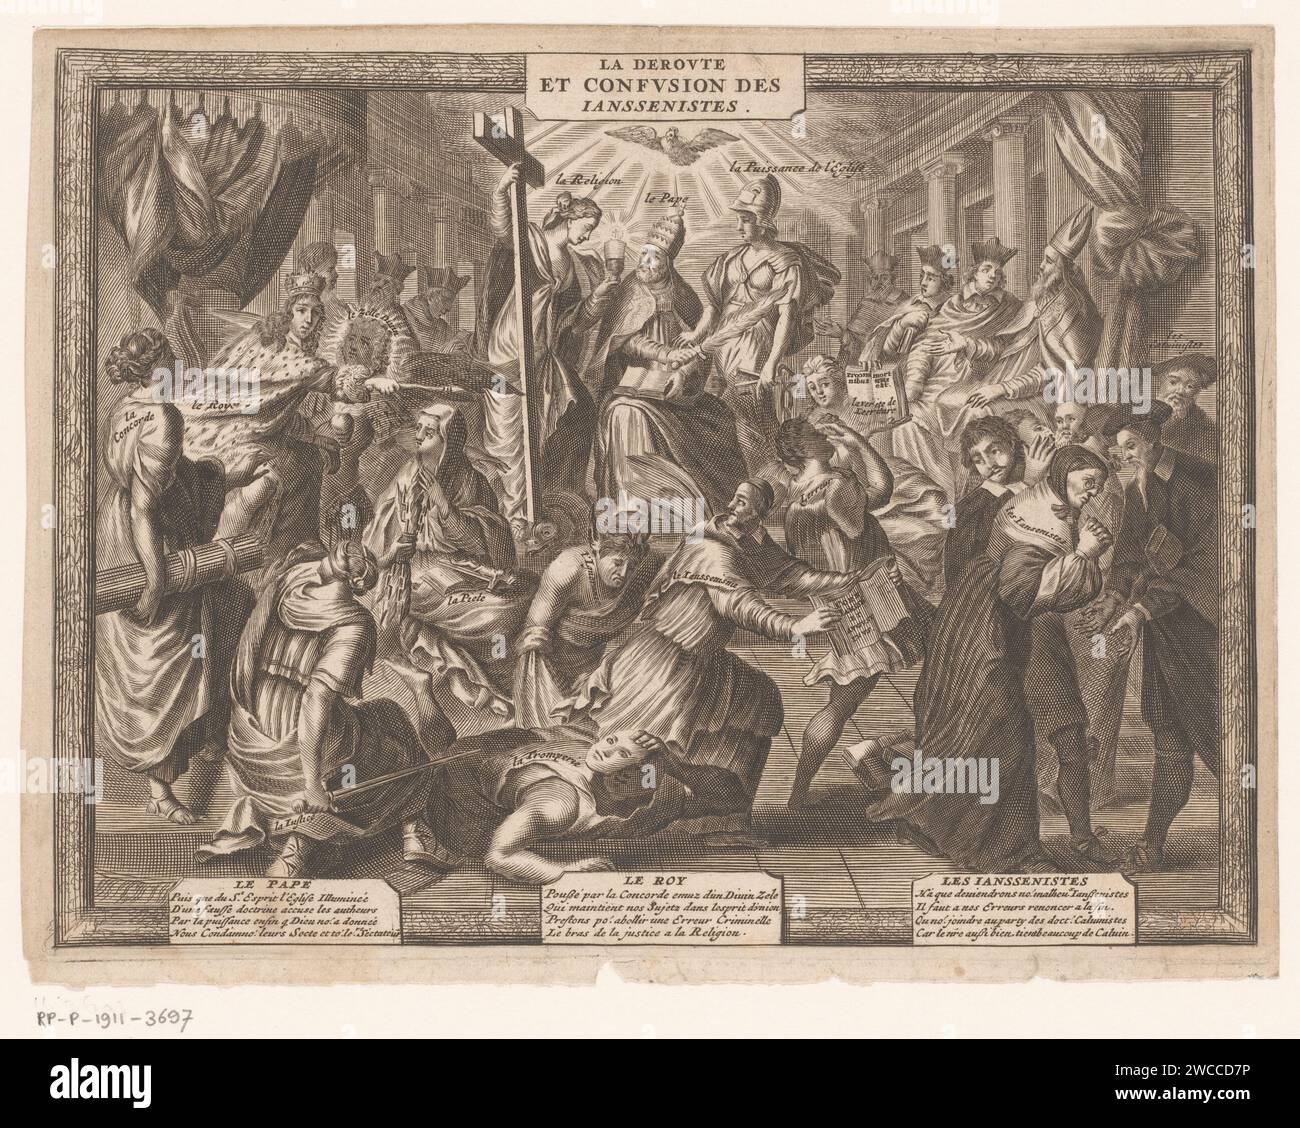 Avoids of the Jansenisten, Anonymous, 1630 - 1690 print The pope in the middle of the top is flanked by the allegorical figures religion and ecclesiastical power. The Holy Spirit flies above him. On the left the king sits on a throne with next to him the Divine zeal, the Eendracht, the righteousness and piety. The king banishes the allegorical figures ignorance, misunderstanding and deception with Jansenism in the middle with 'the Augustine' in his hands, preceded by Jansenists.  paper engraving suspension, expulsion (from a society). pope. king Stock Photo